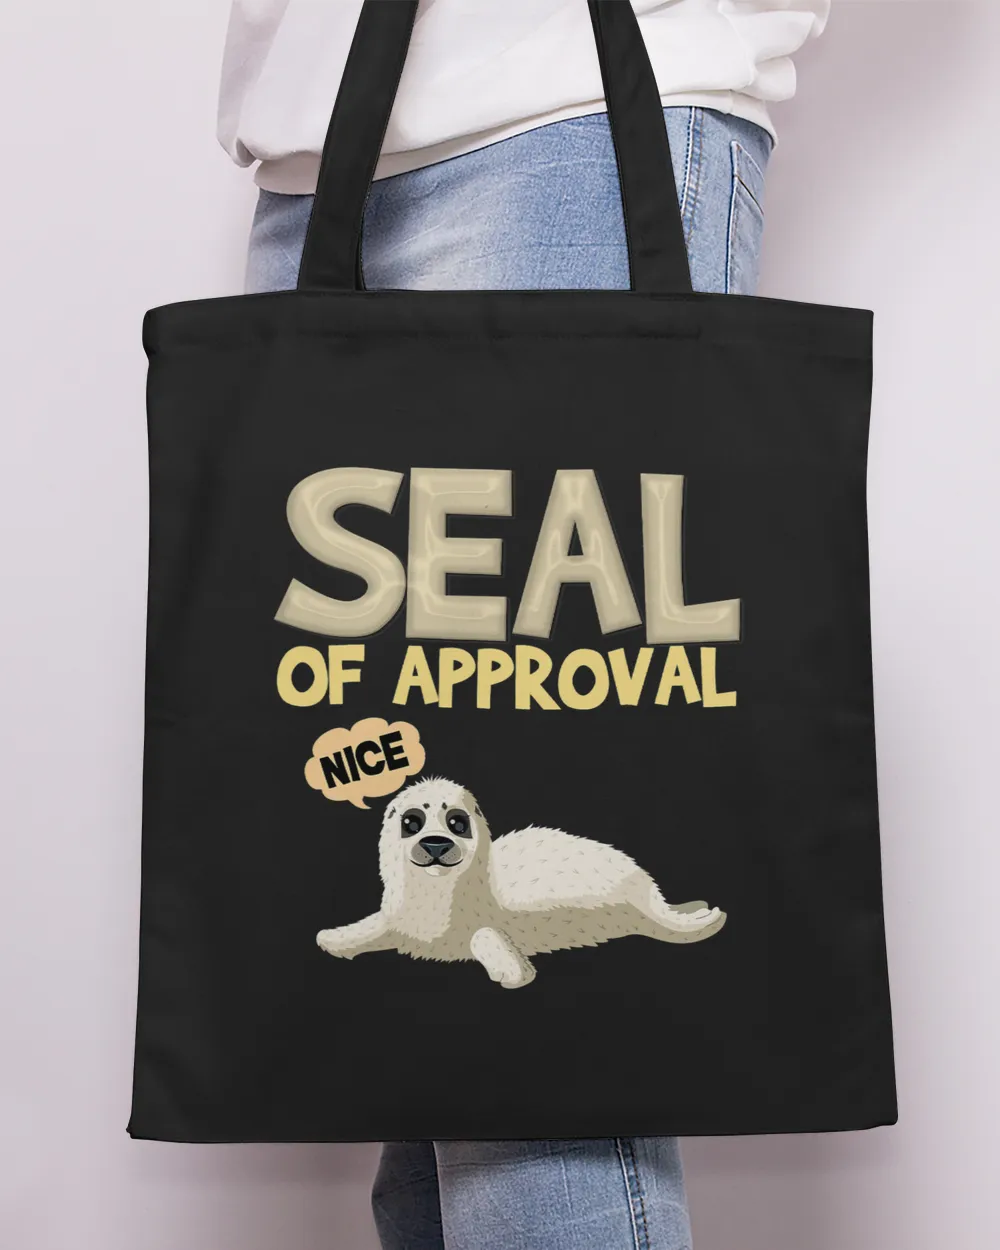 Seal Lover Funny Seal of Approval Animal Quote